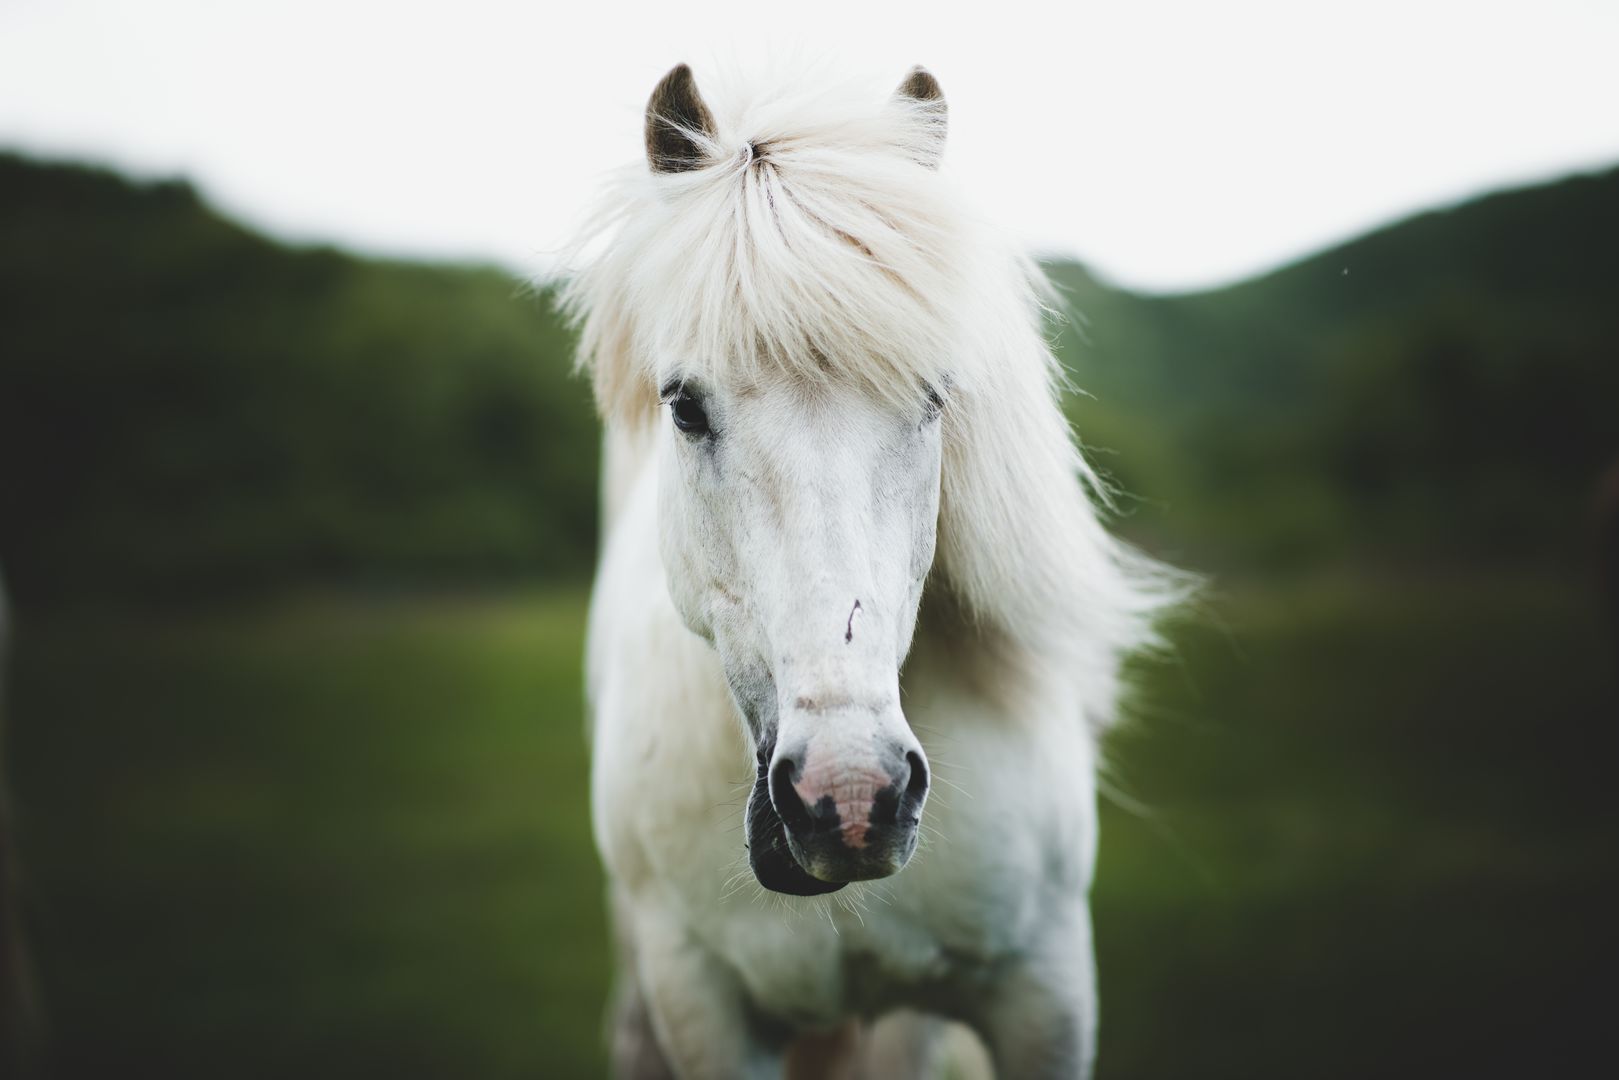 a head-on, close up image of a white Icelandic horse